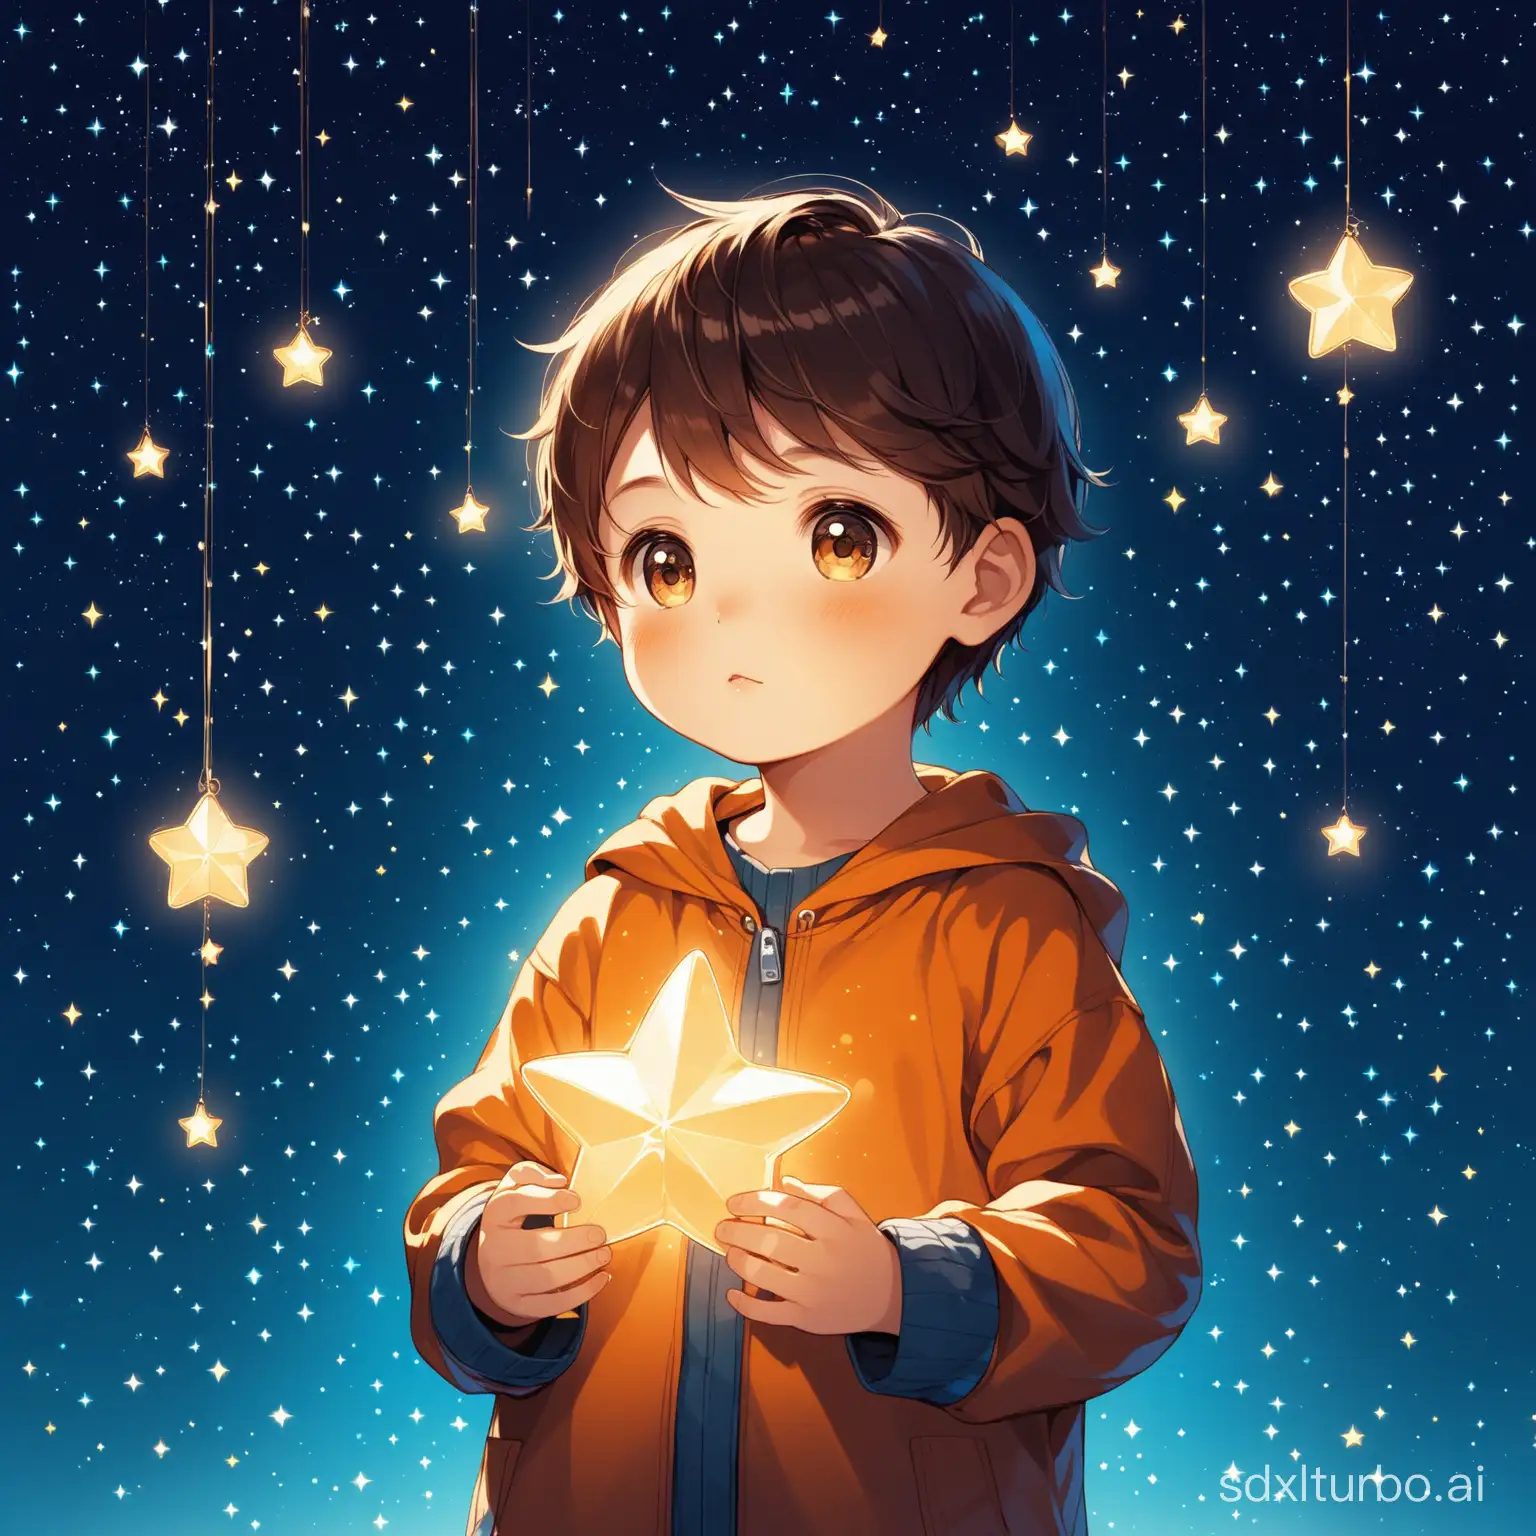 Adorable-Little-Boy-Holding-Glowing-Stars